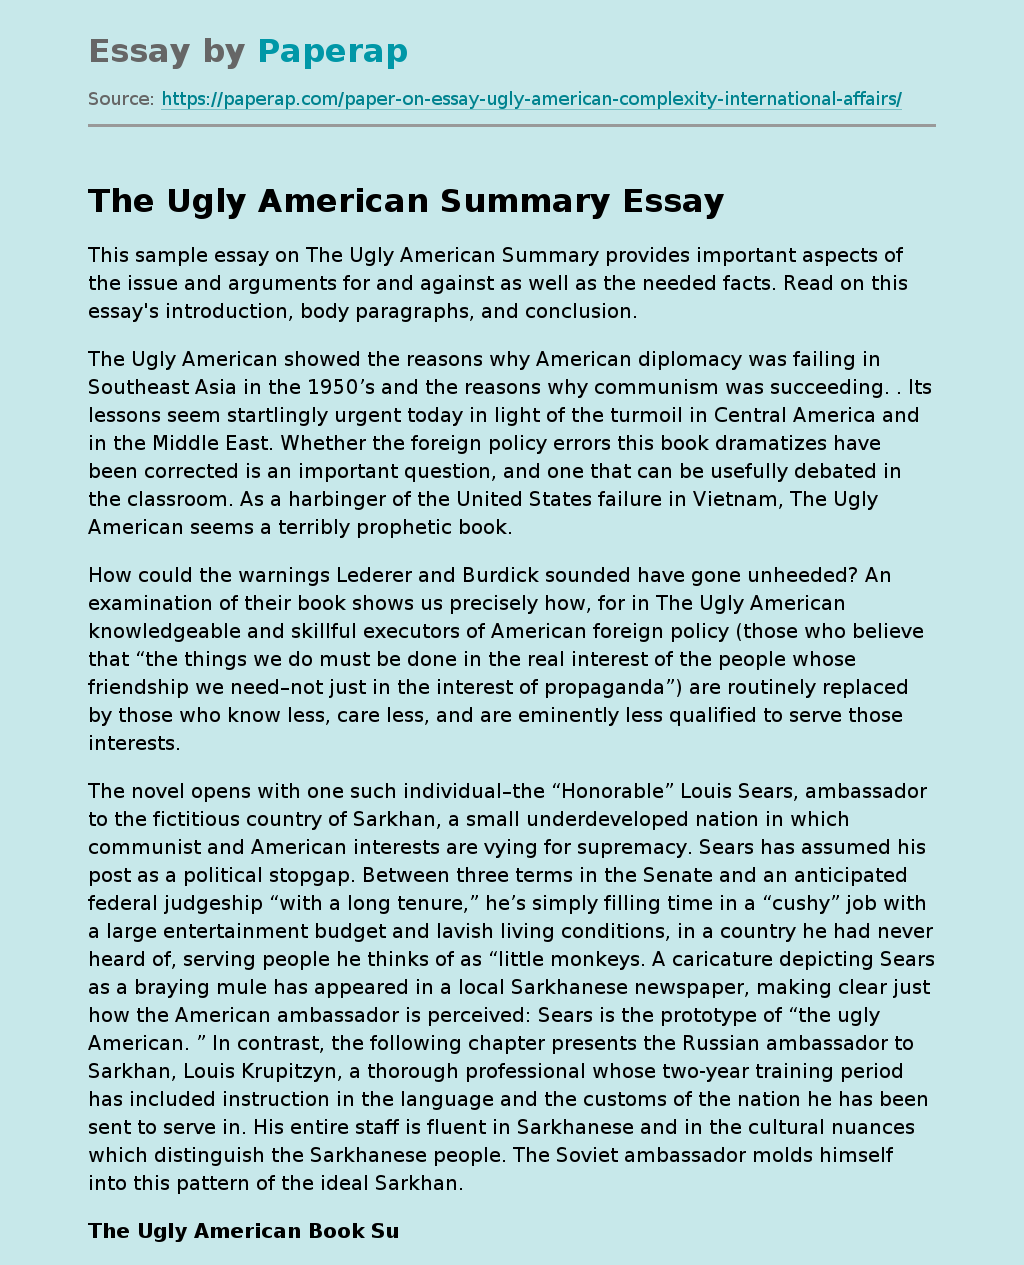 The Ugly American Summary